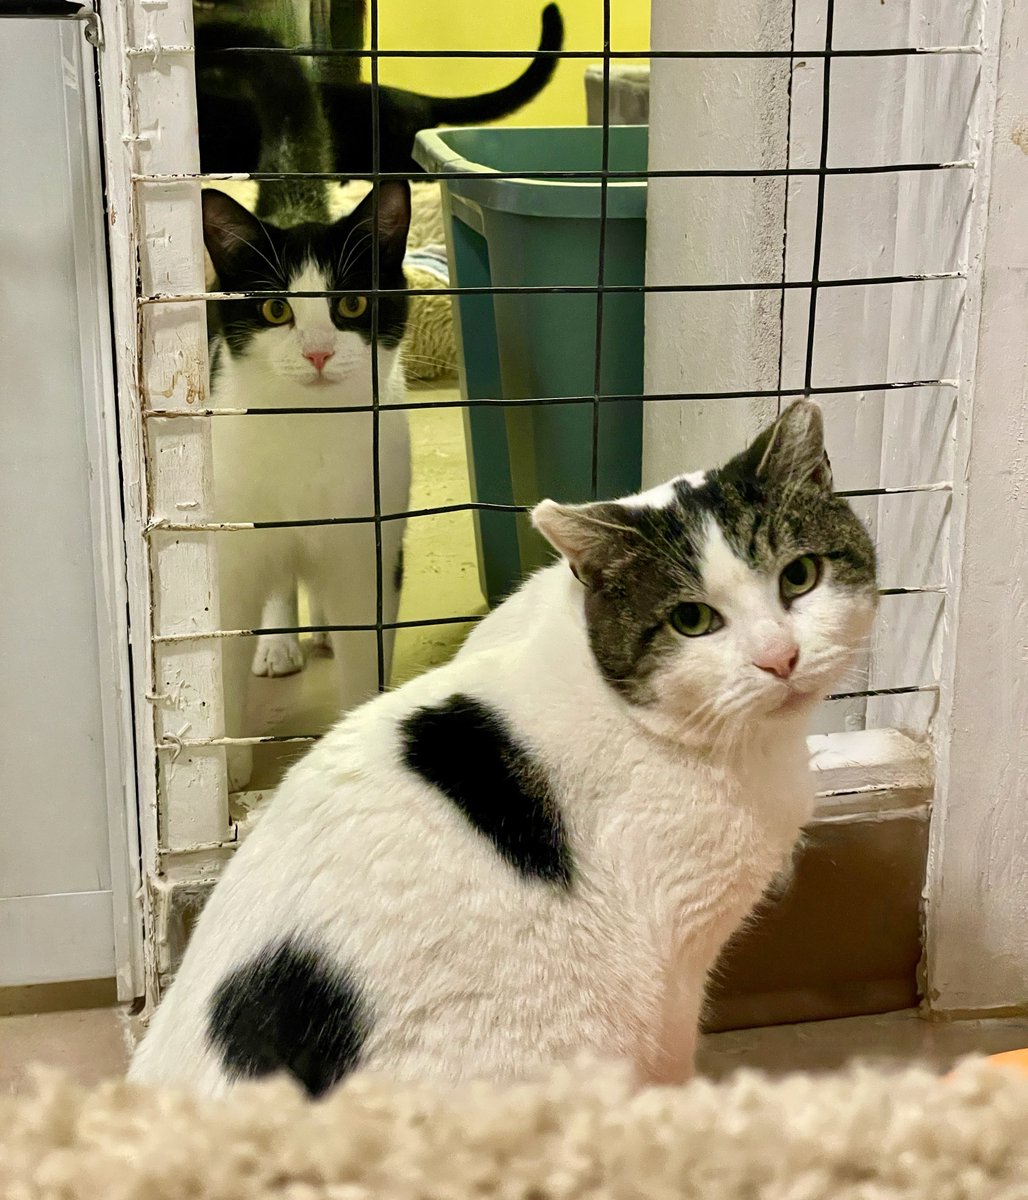 👏Woohoo! Shaw has come out of his litter box to see who's in the next room! Brave boy! Cereal's happy to say hello & be friendly💖#cats #monday #MondayMood #pets #va #virginia #nova #dc #CatsLover #StraysOfOurLives #rescue #CatsOfTwitter #cat #MondayMorning #mondayfeeling